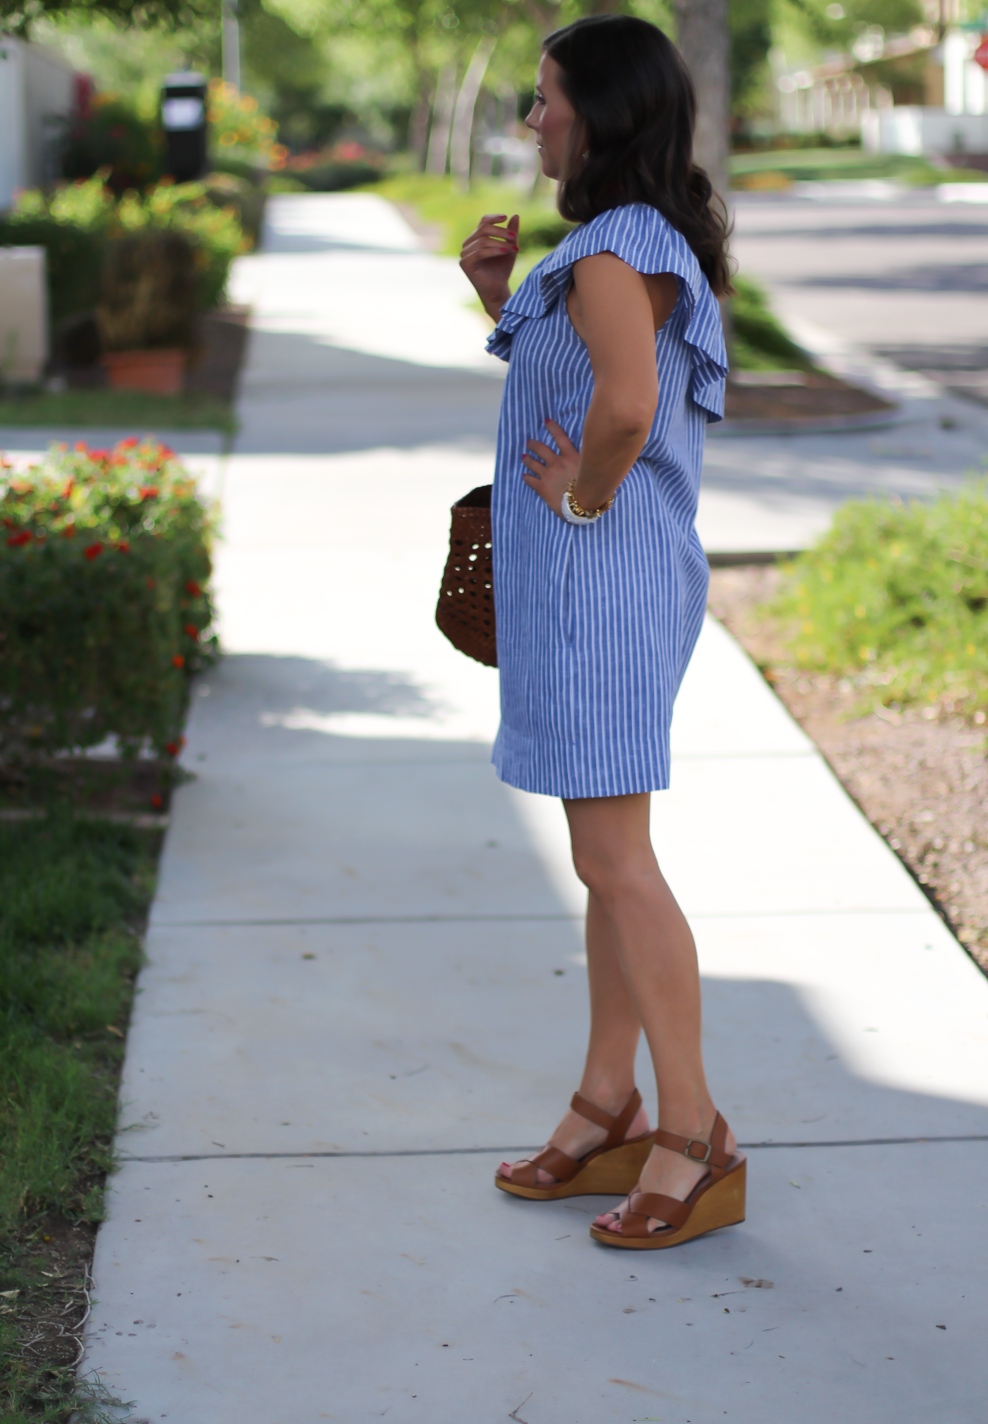 Striped One Shoulder Ruffle Dress, Cognac Leather Wedge Sandals, Leather Basket Tote, Madewell, J.Crew